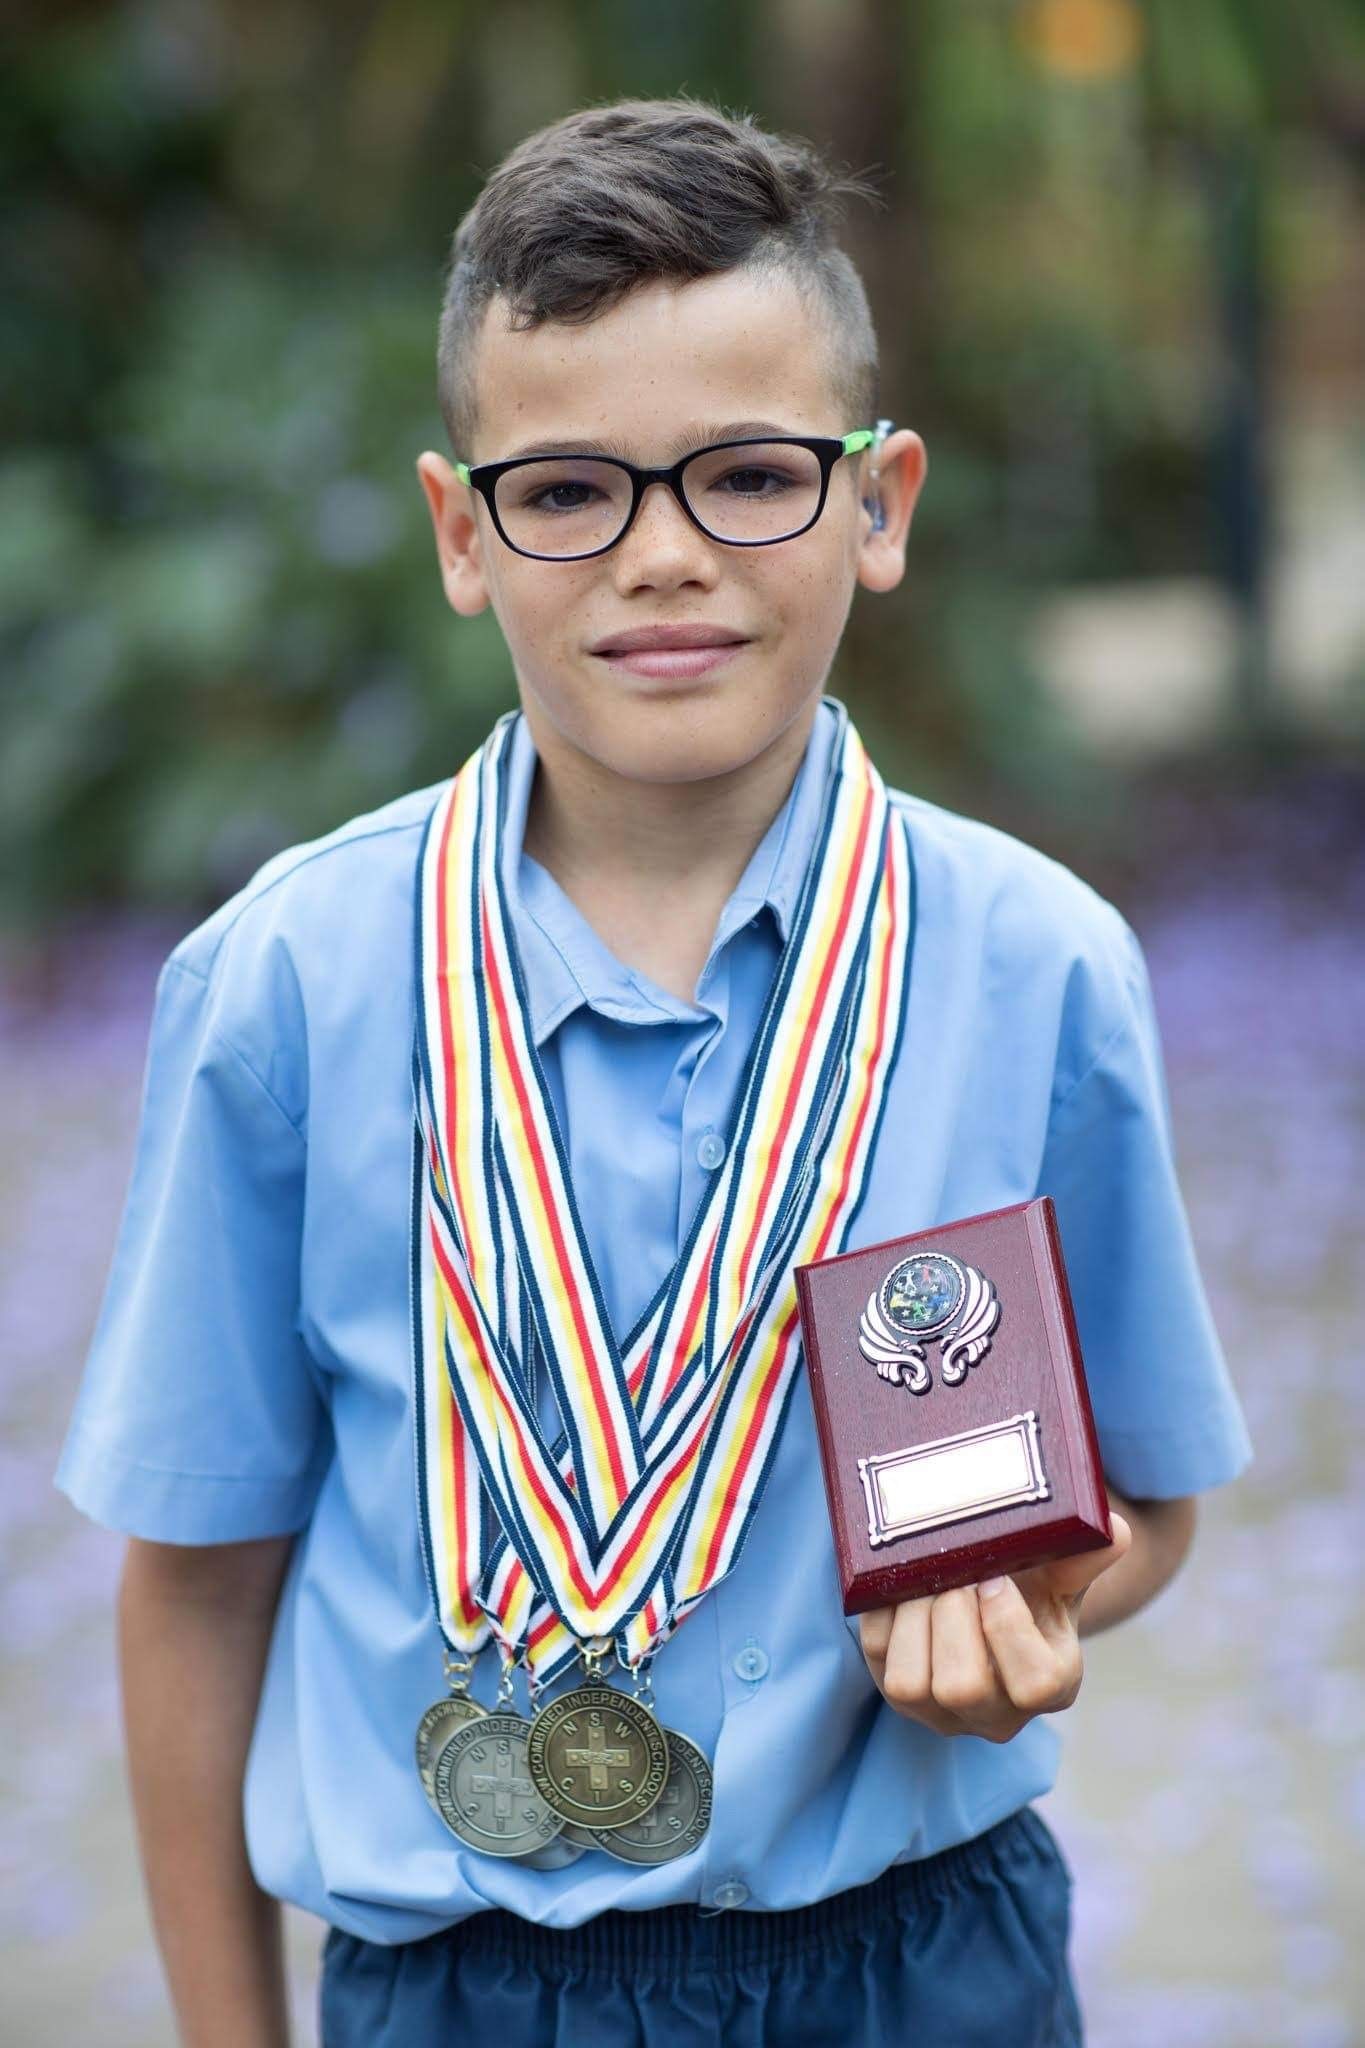 A young boy smiles as he wears multiple medals and holds a trophy.